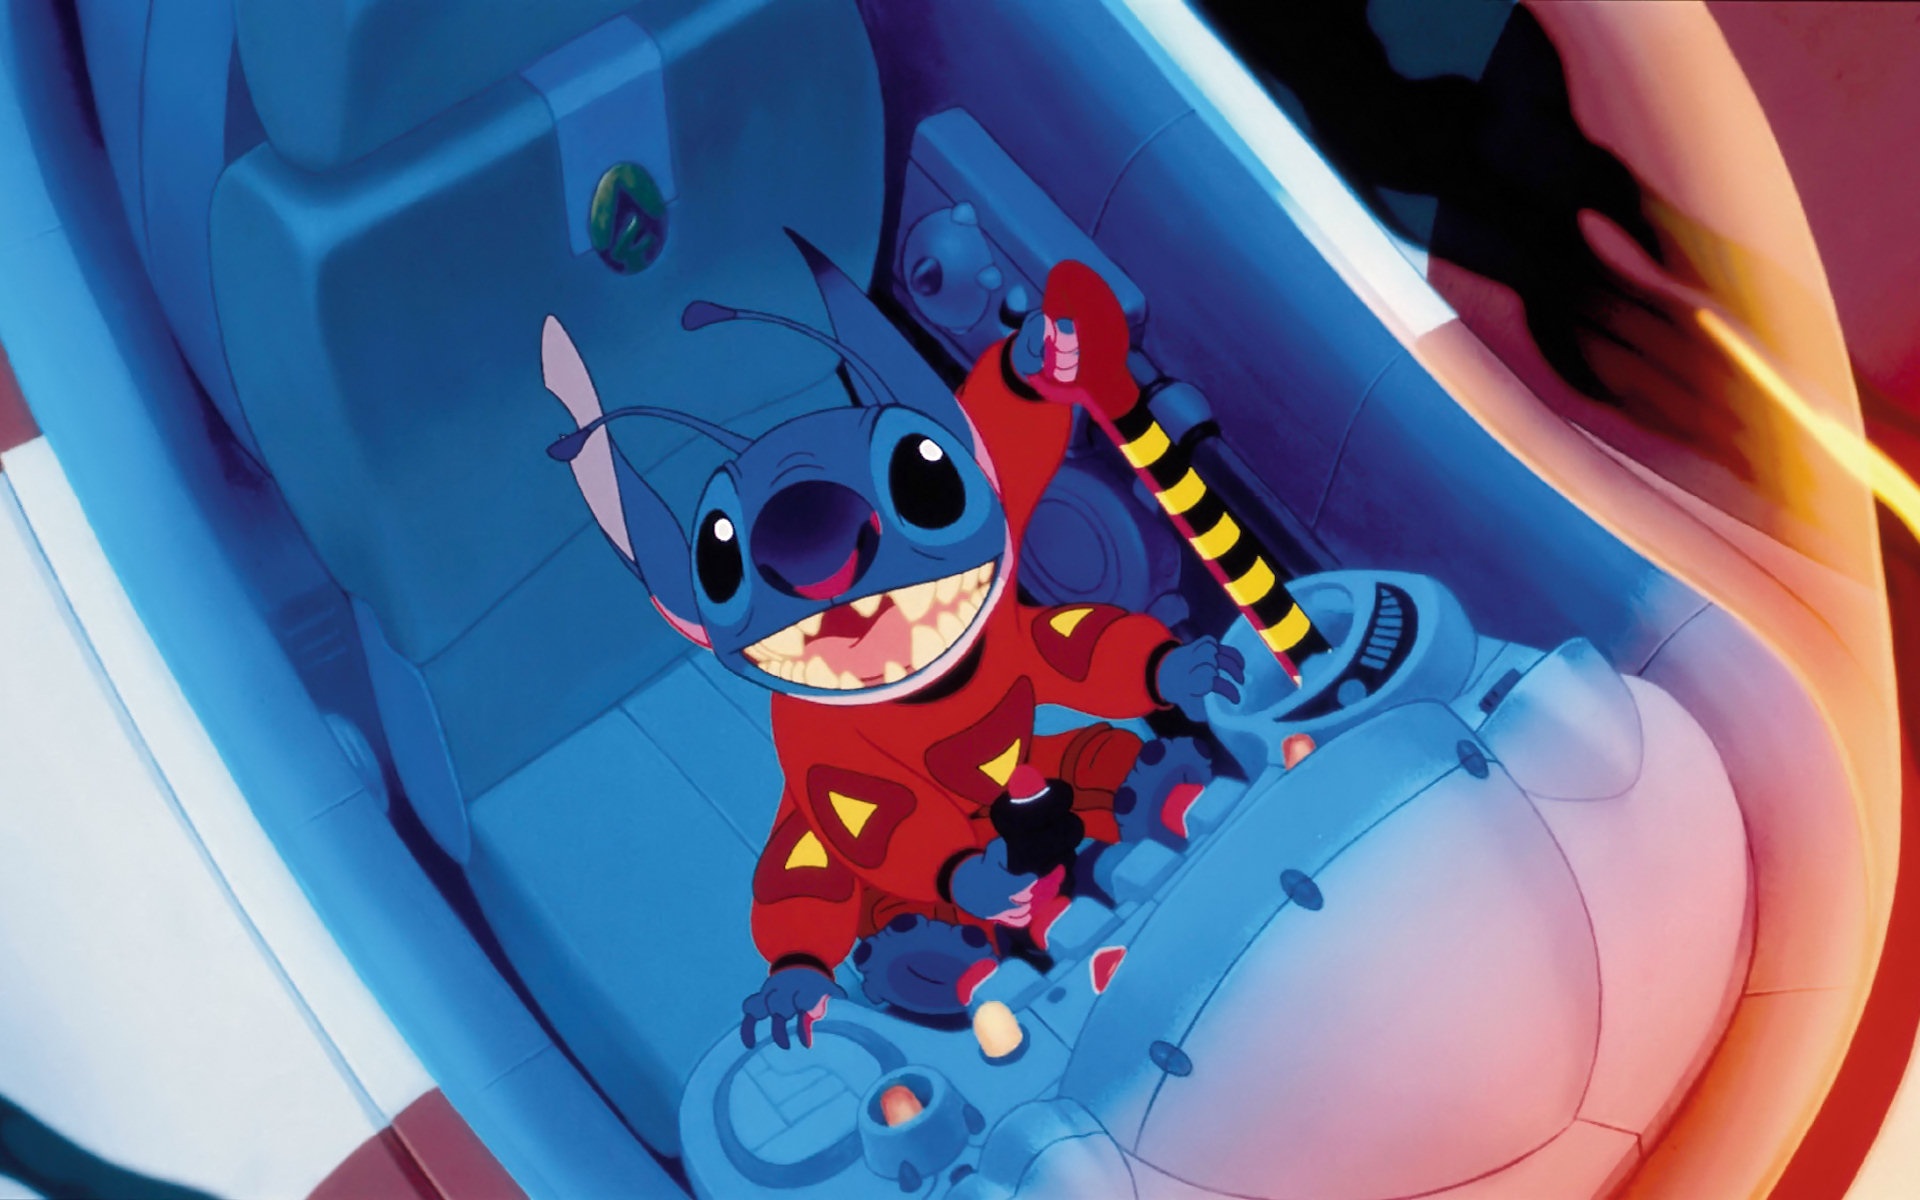 Cartoon Stitch Wallpapers Wallpapers, Backgrounds, Images, Art